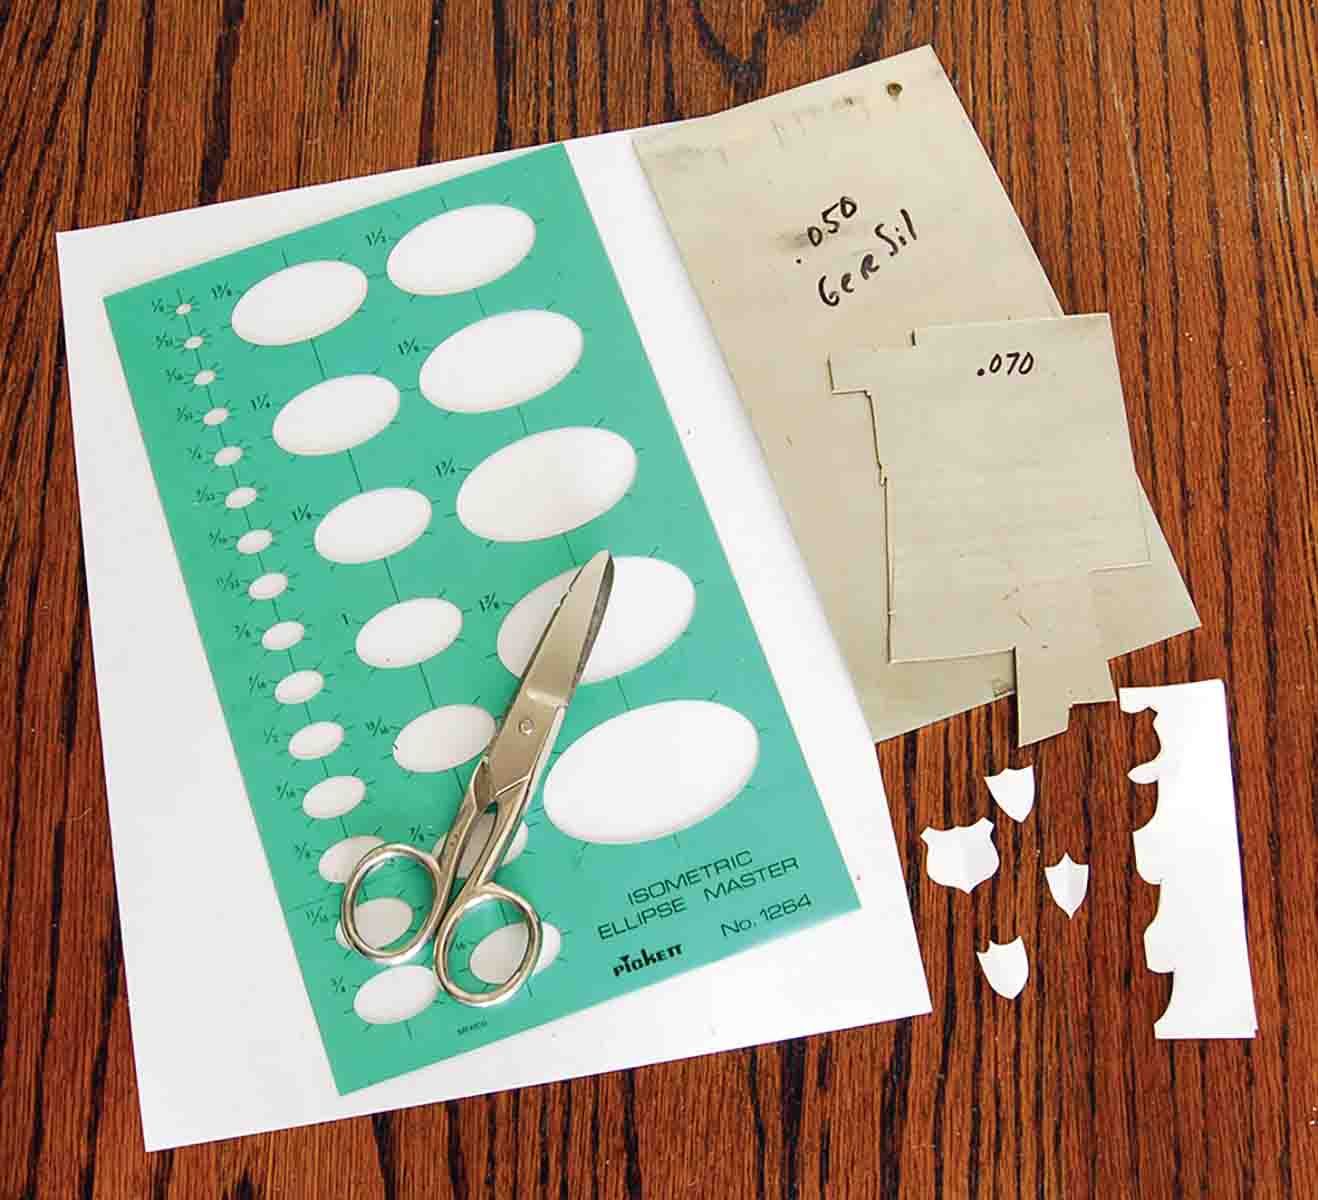 Initial shields can be drawn on paper and cut out or traced using an ellipse template.